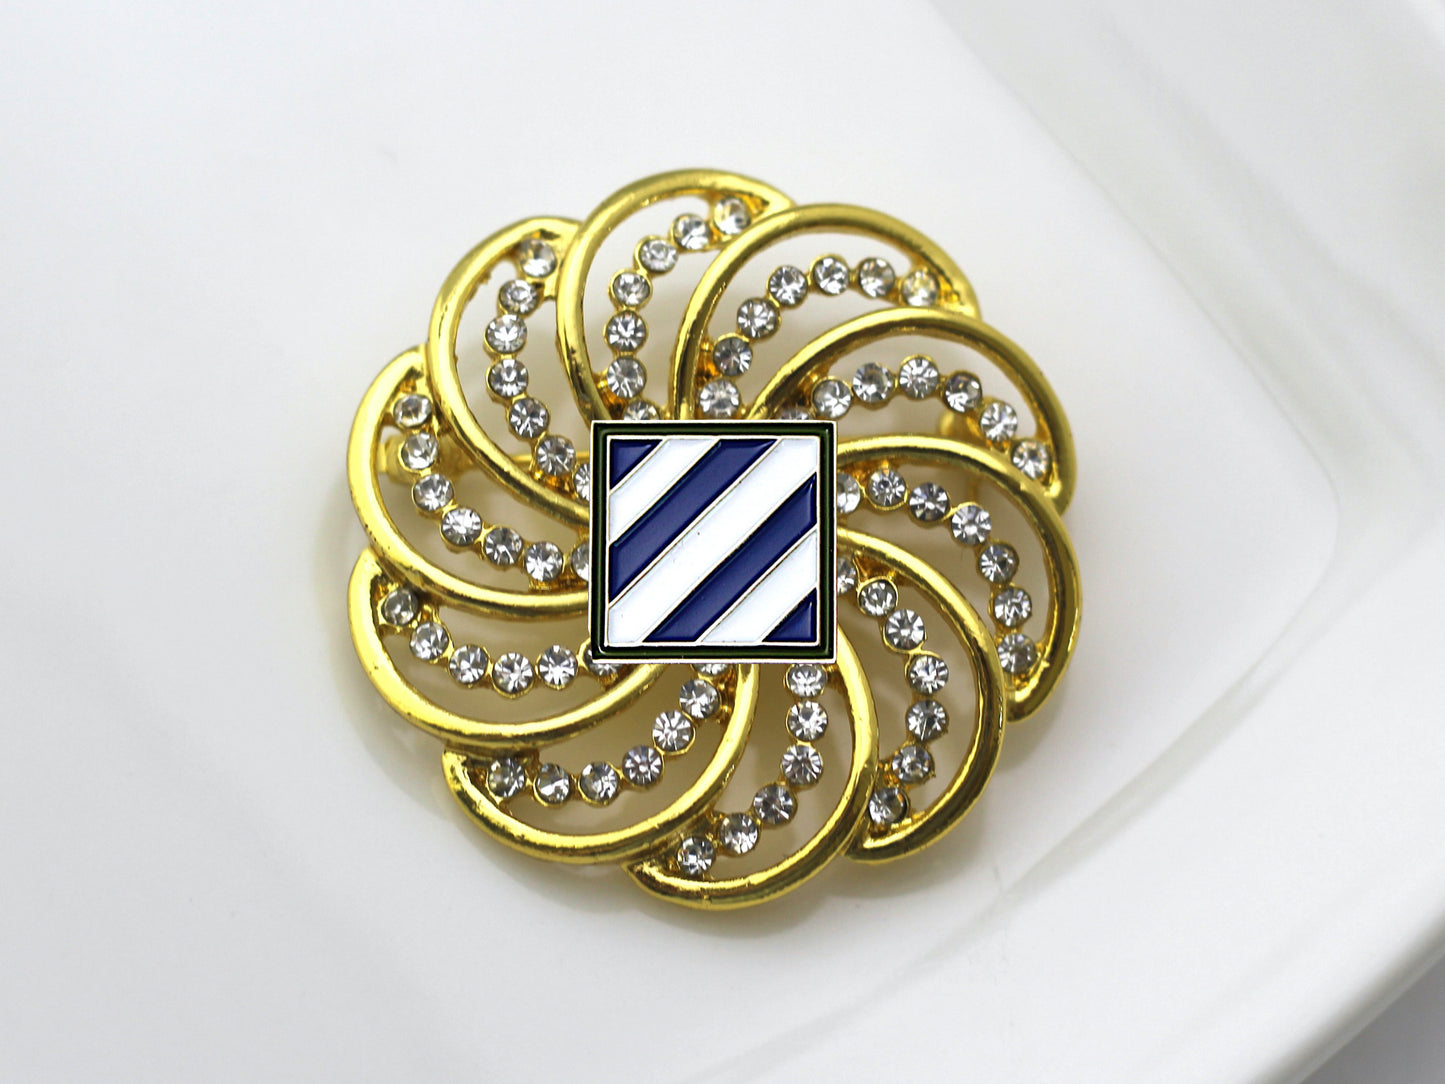 3rd Infantry Division Brooch